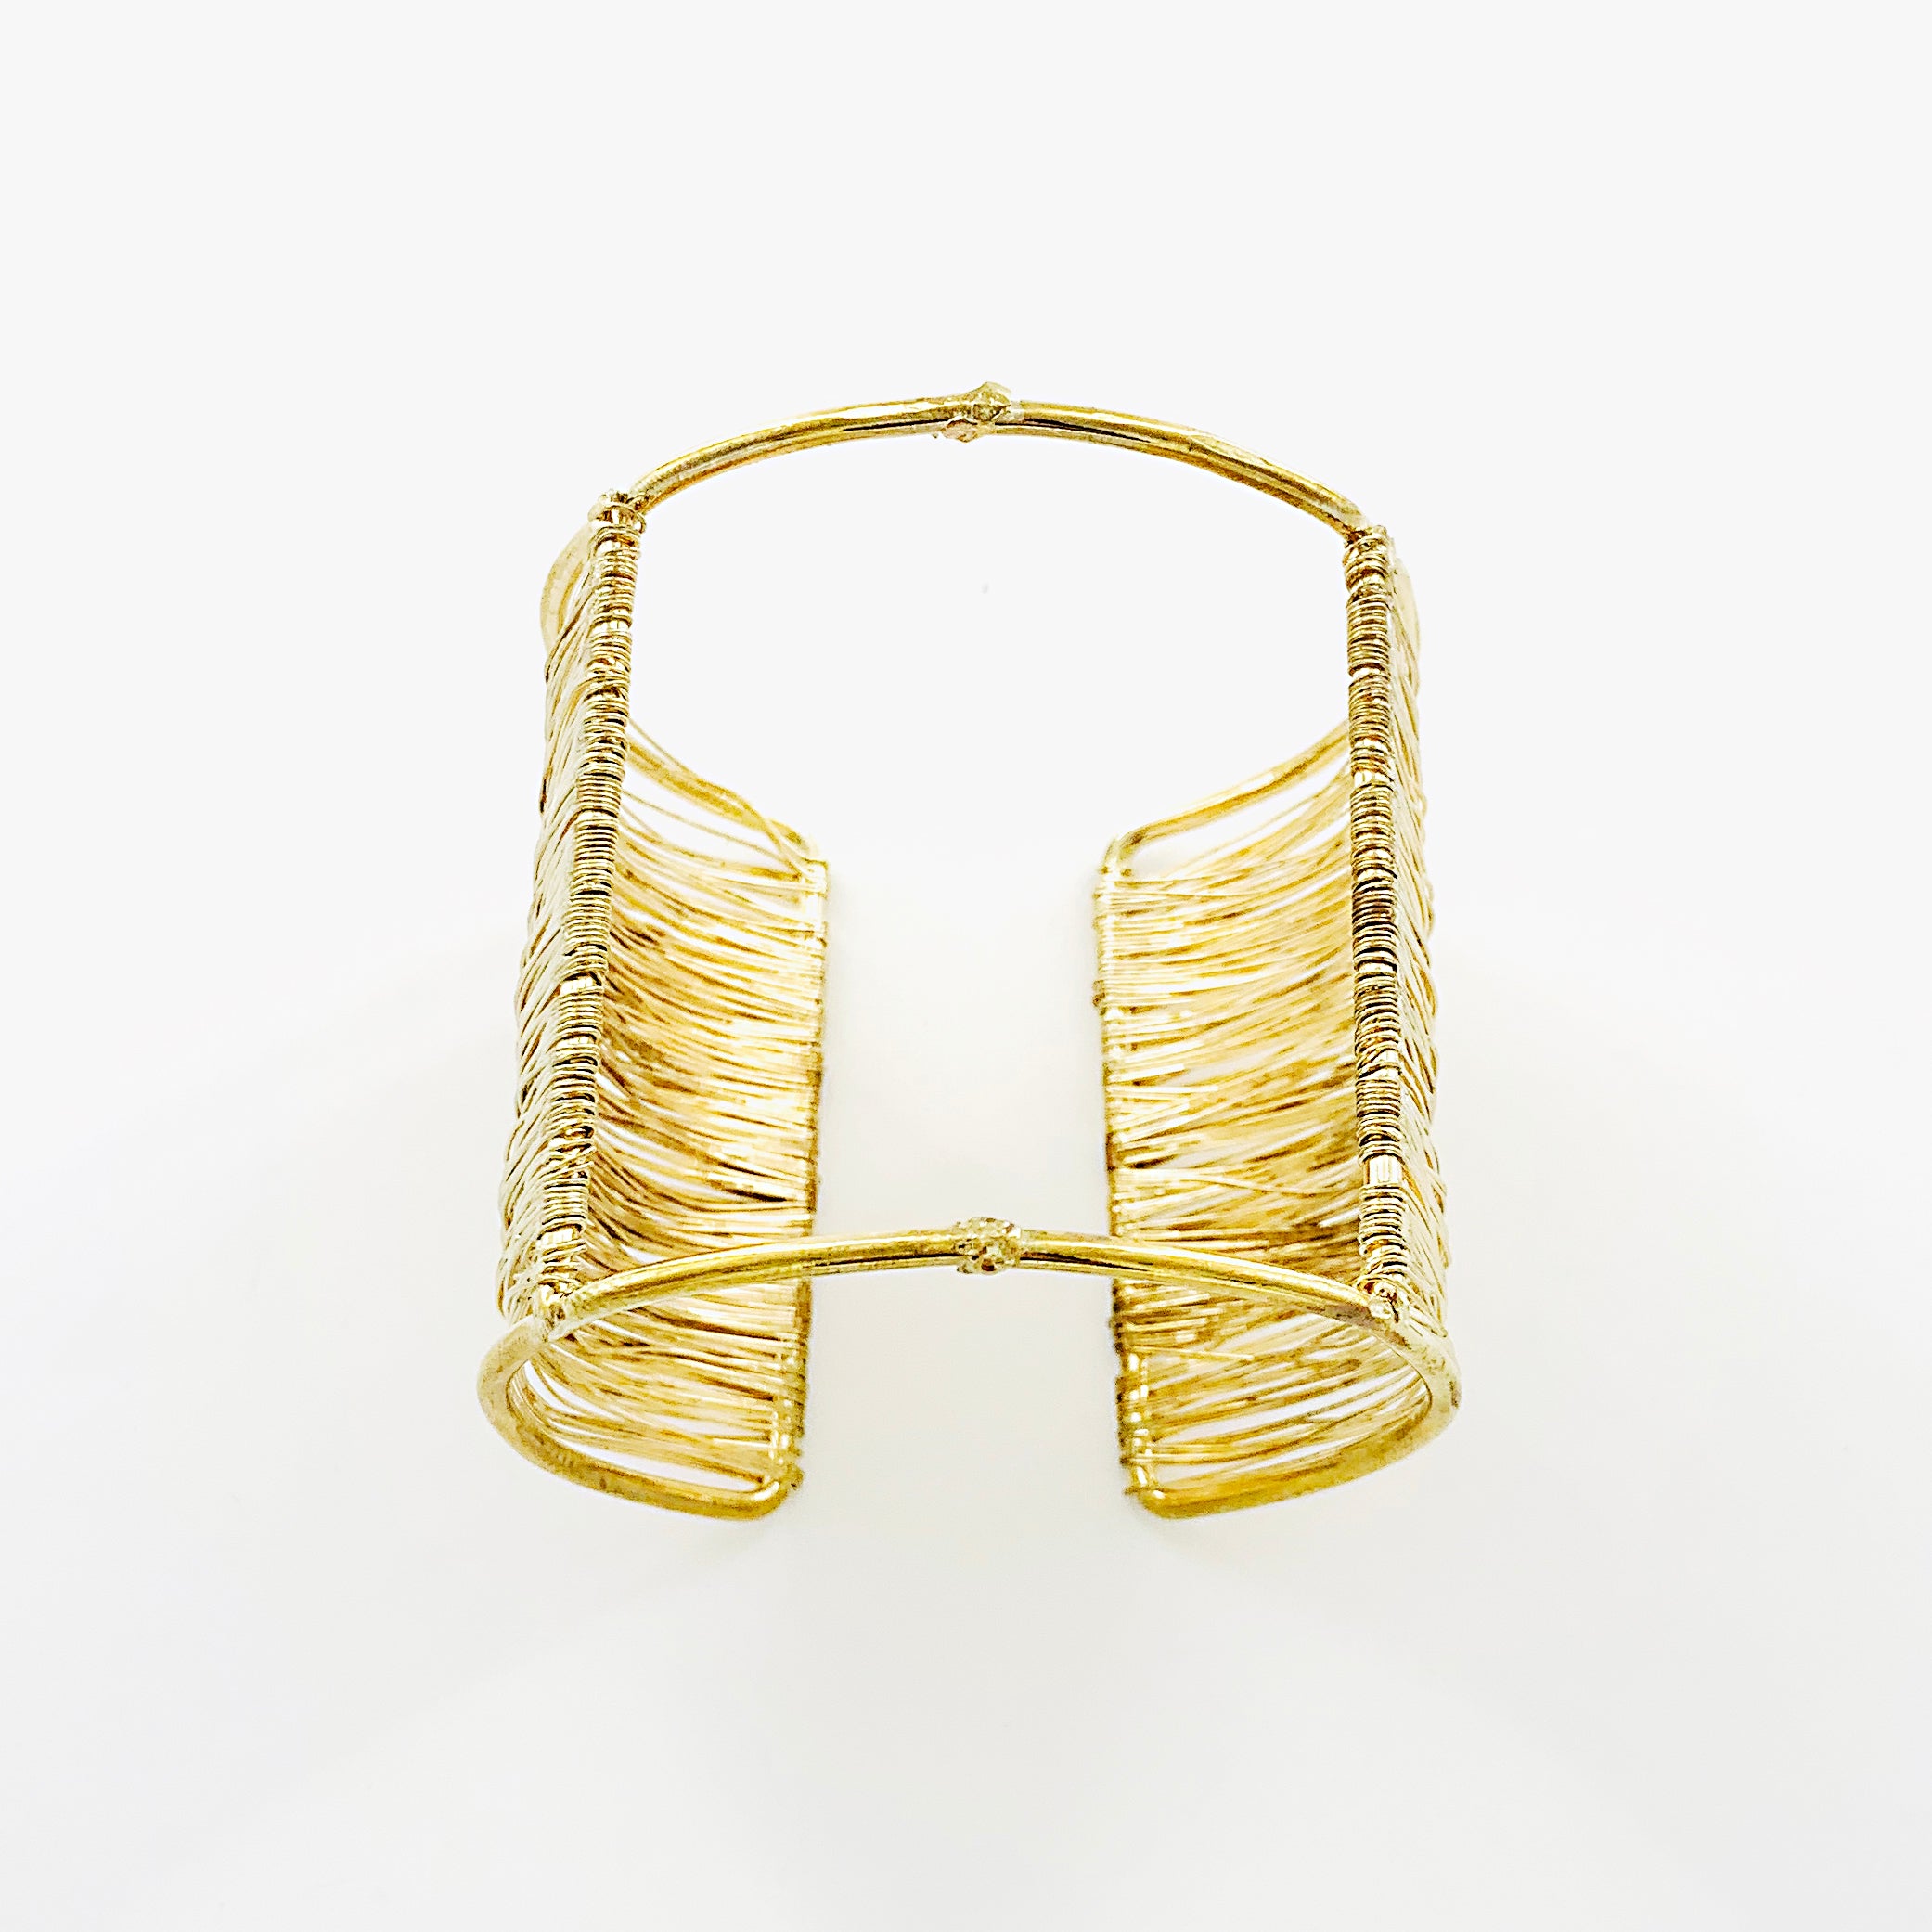 Gold cuff with twisted mesh design